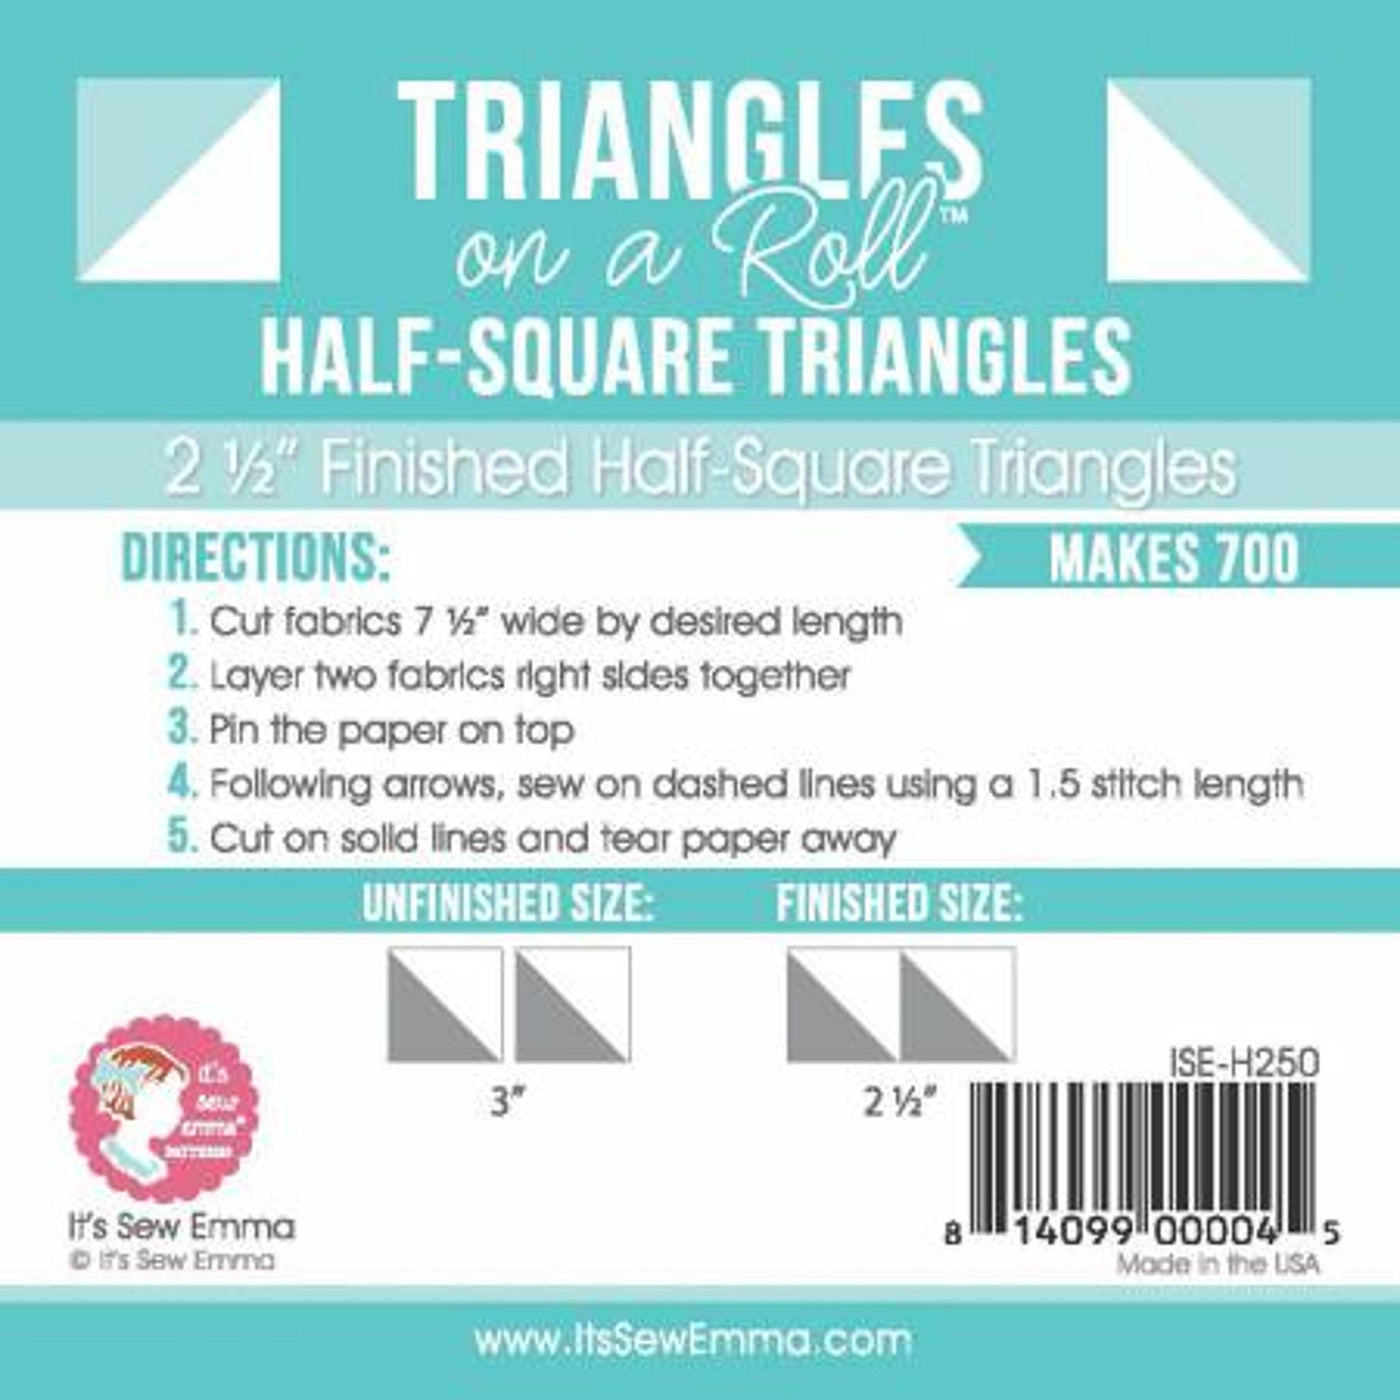 Triangles on a Roll - 2 1/2"" Half-square triangles